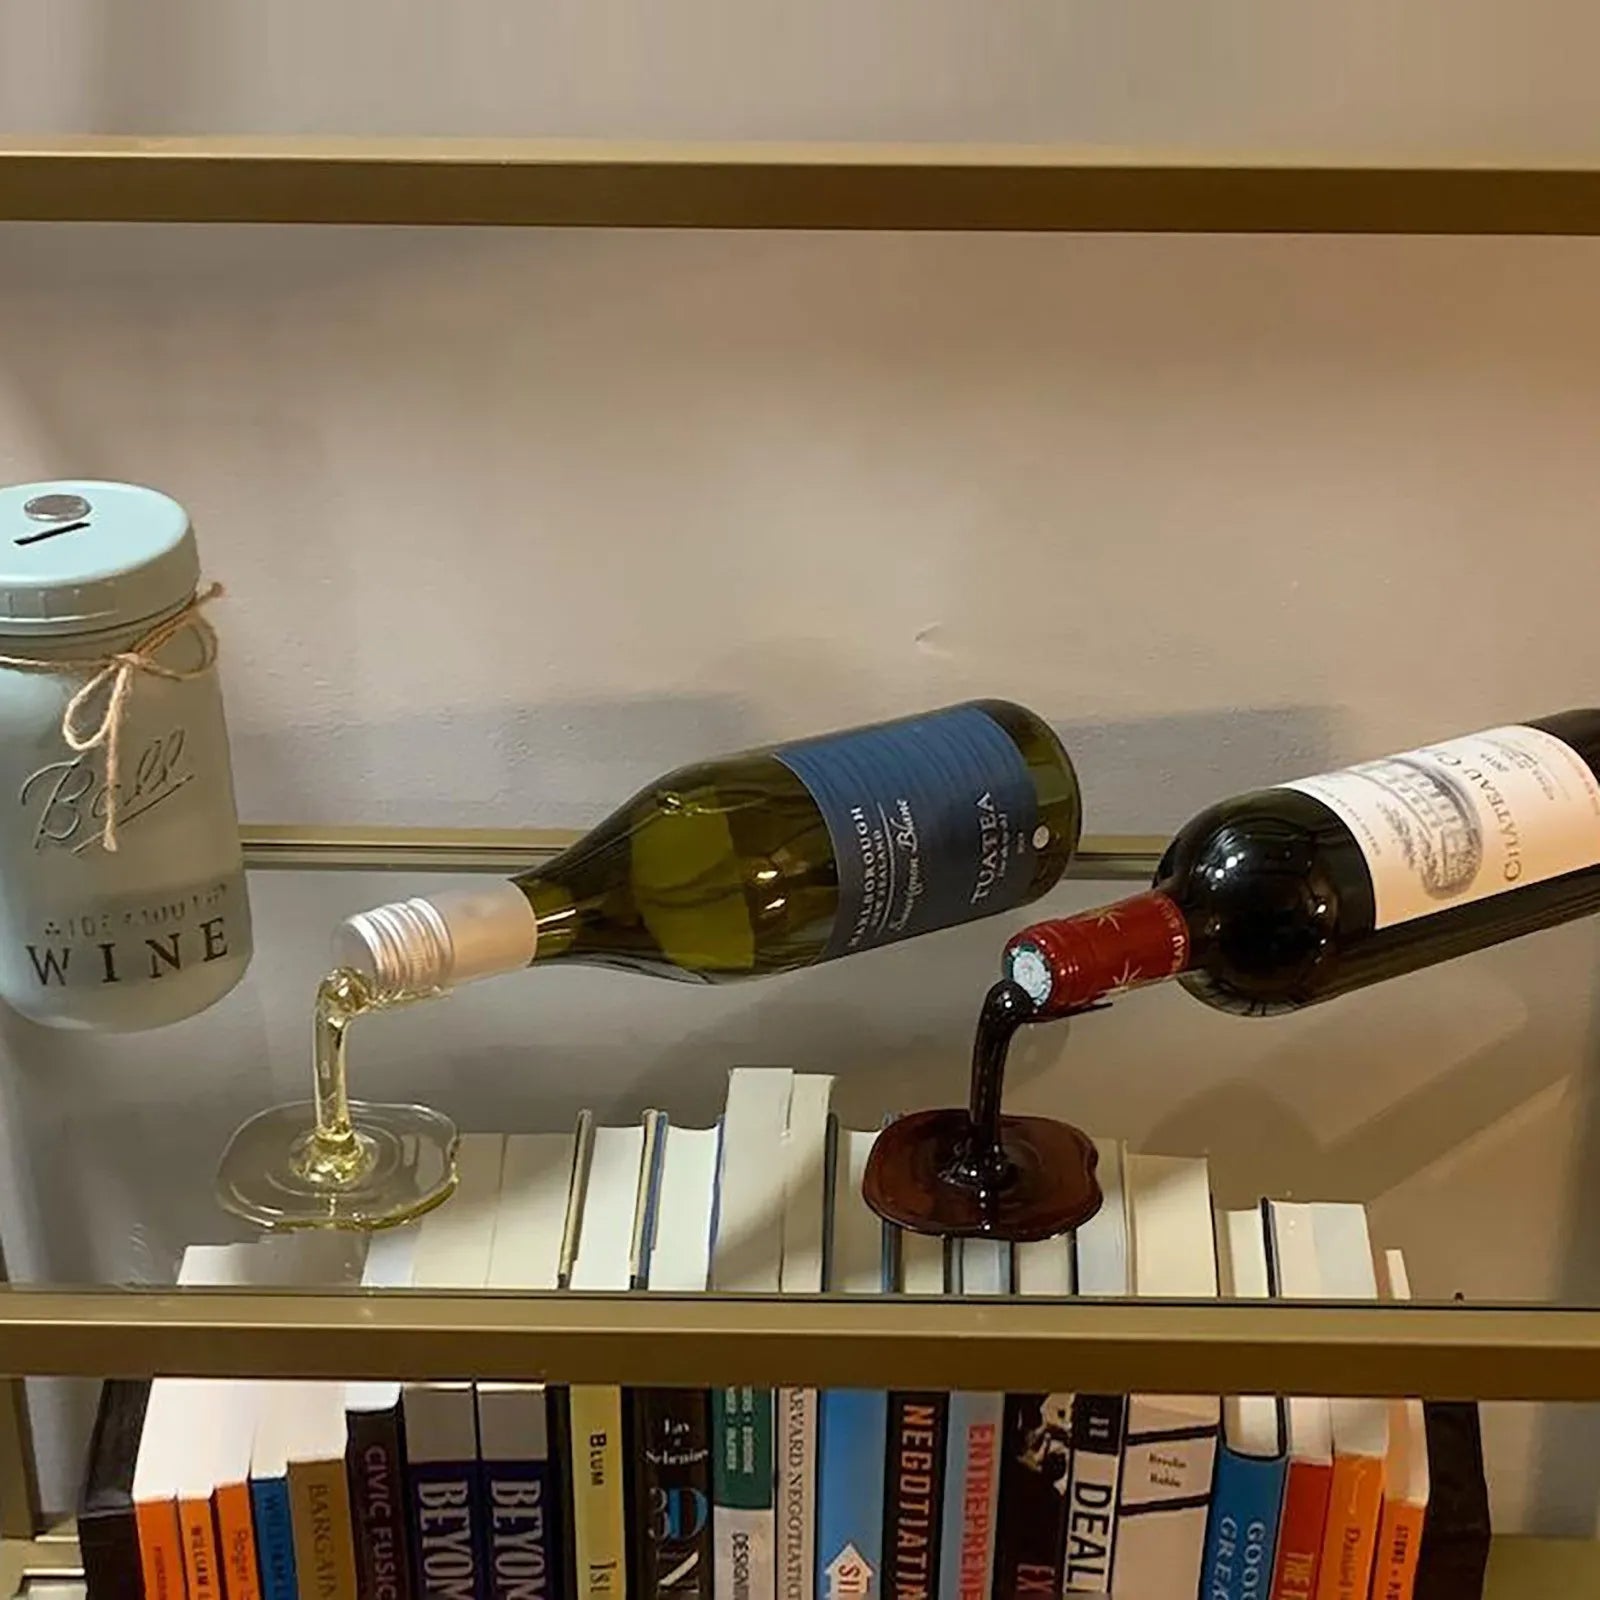 The Spilled Wine Bottle Holder creates the optical illusion of the wine bottle floating in the air and spilling out liquid onto the surface. 